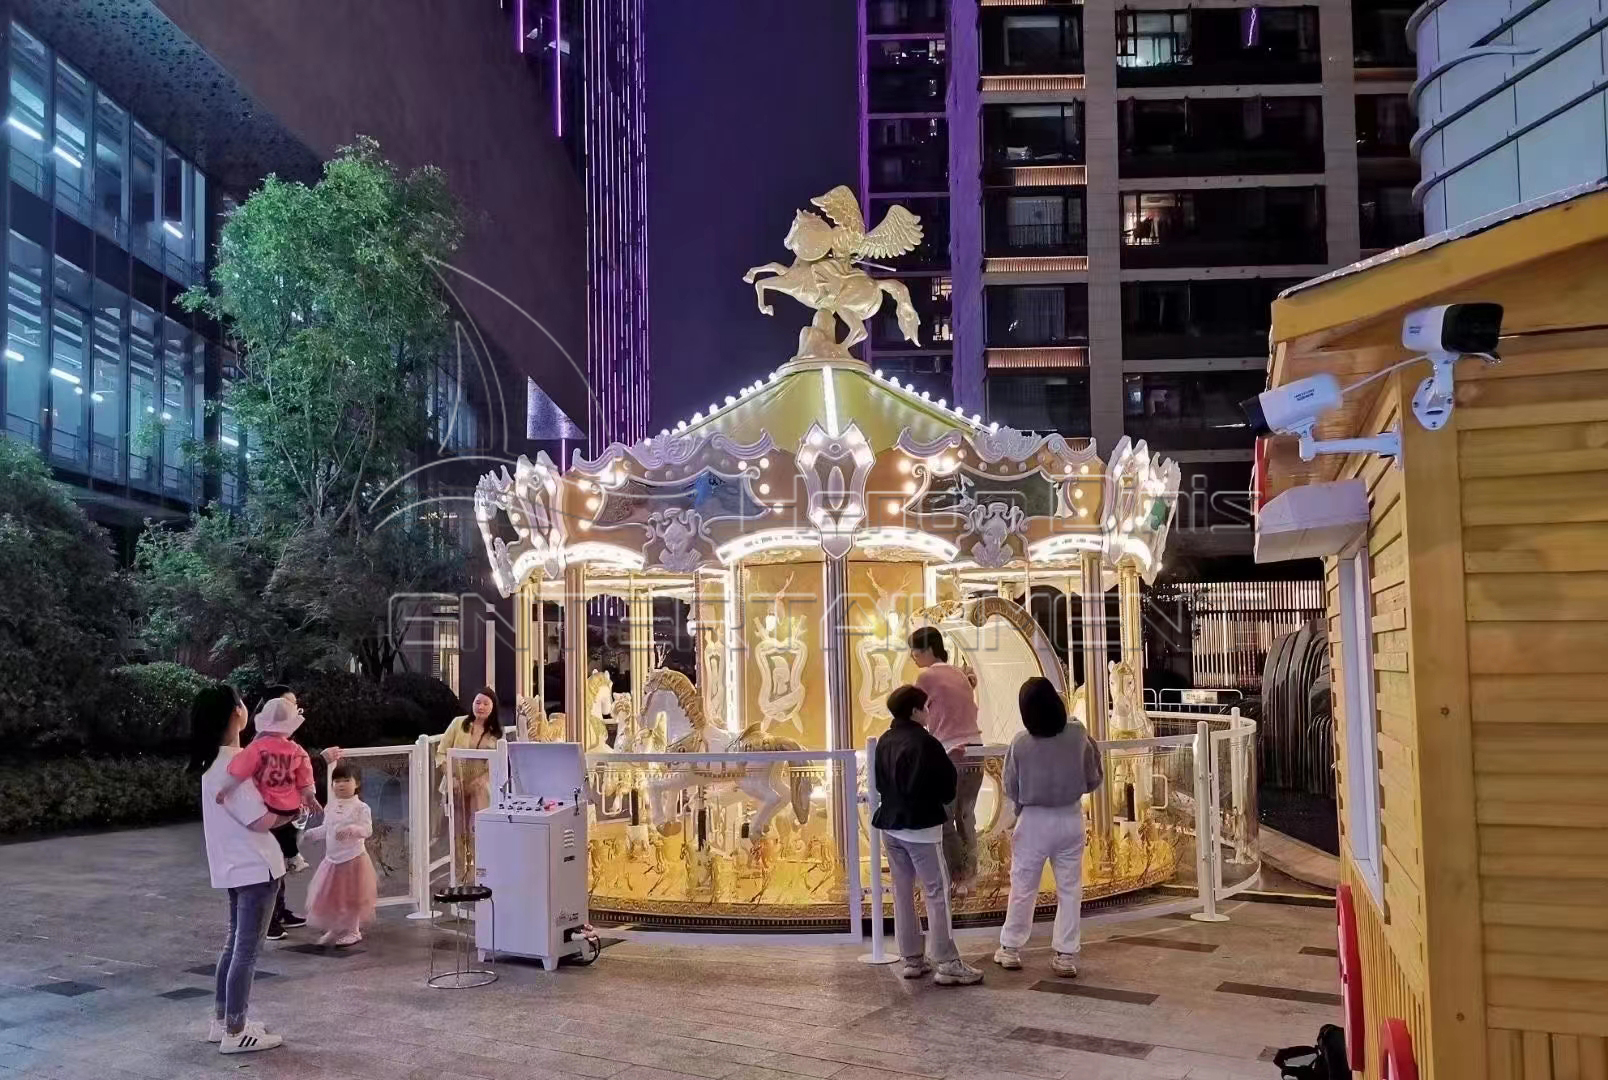 The Feedback Of Carousel Ride From Our Client